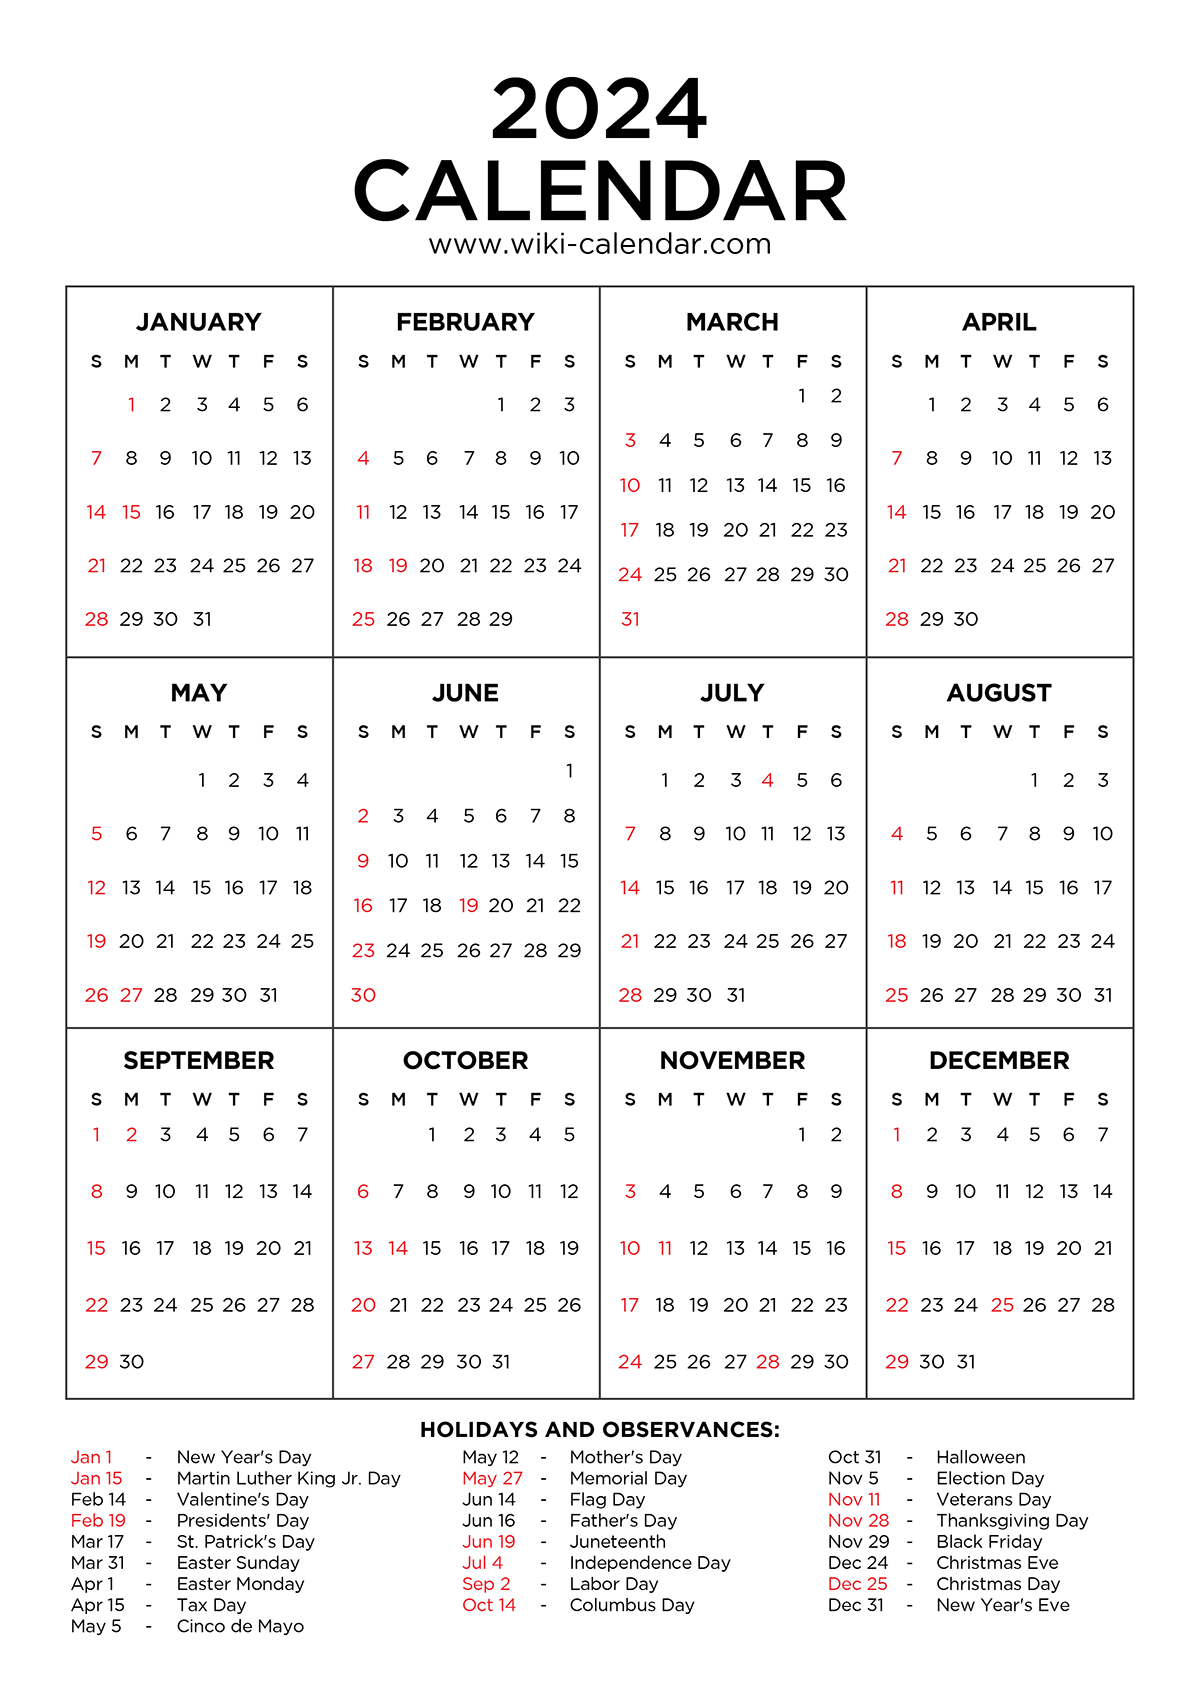 Year 2024 Calendar Printable With Holidays - Wiki Calendar throughout Free Printable Calendar 2024 Time And Date